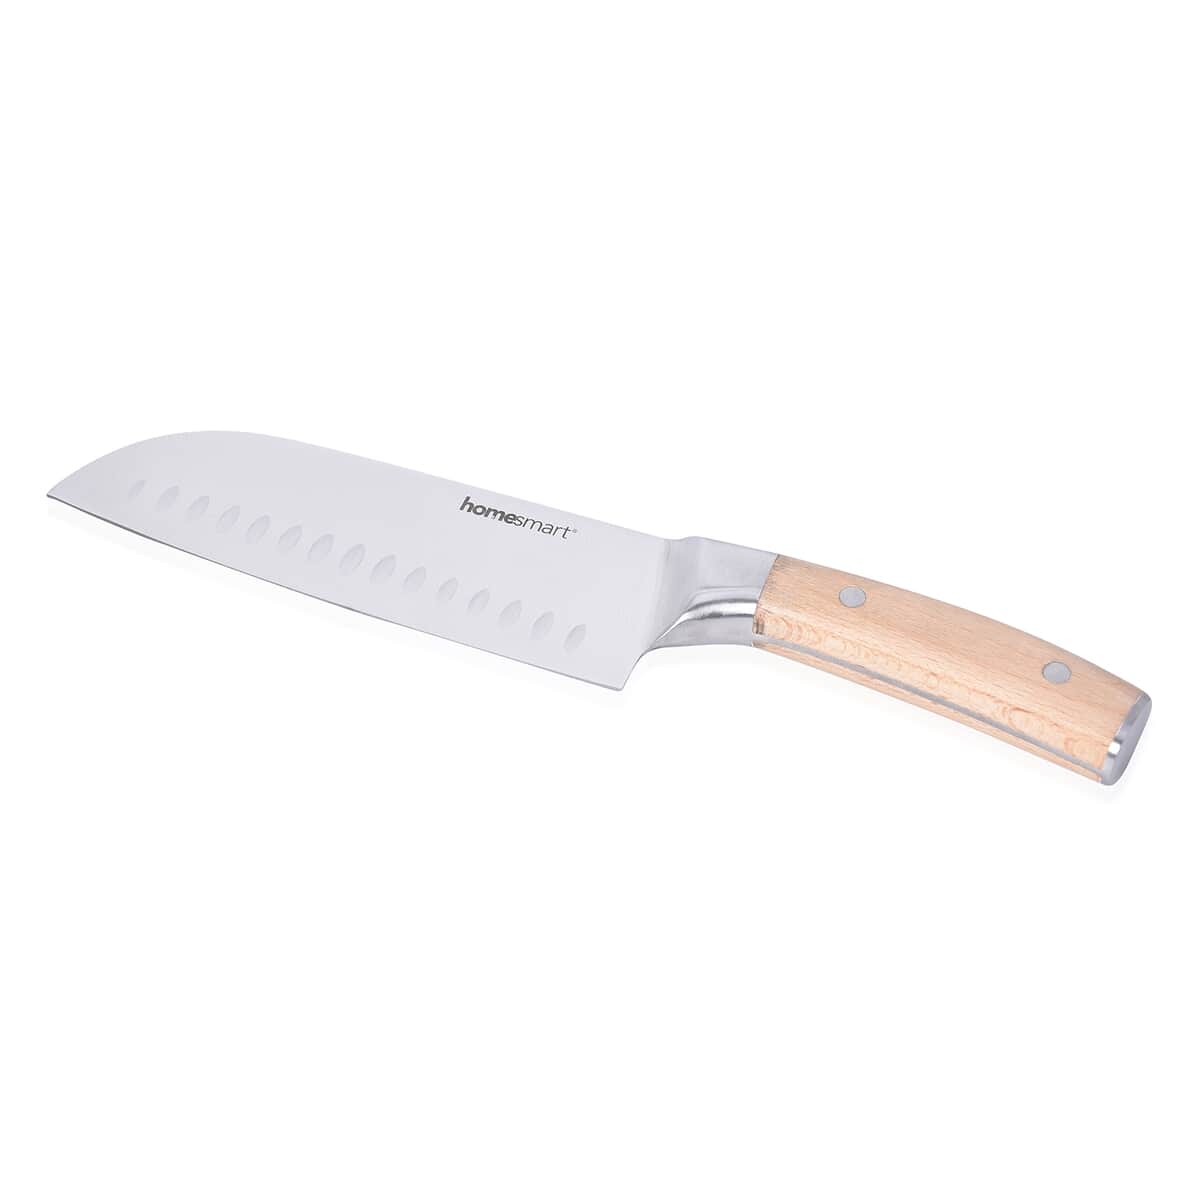 HOMESMART Santoku Chef's Knife in Stainless Steel with Beige Wooden Handle | Stainless Steel Knife | Wooden Knife | Kitchen Knife image number 0